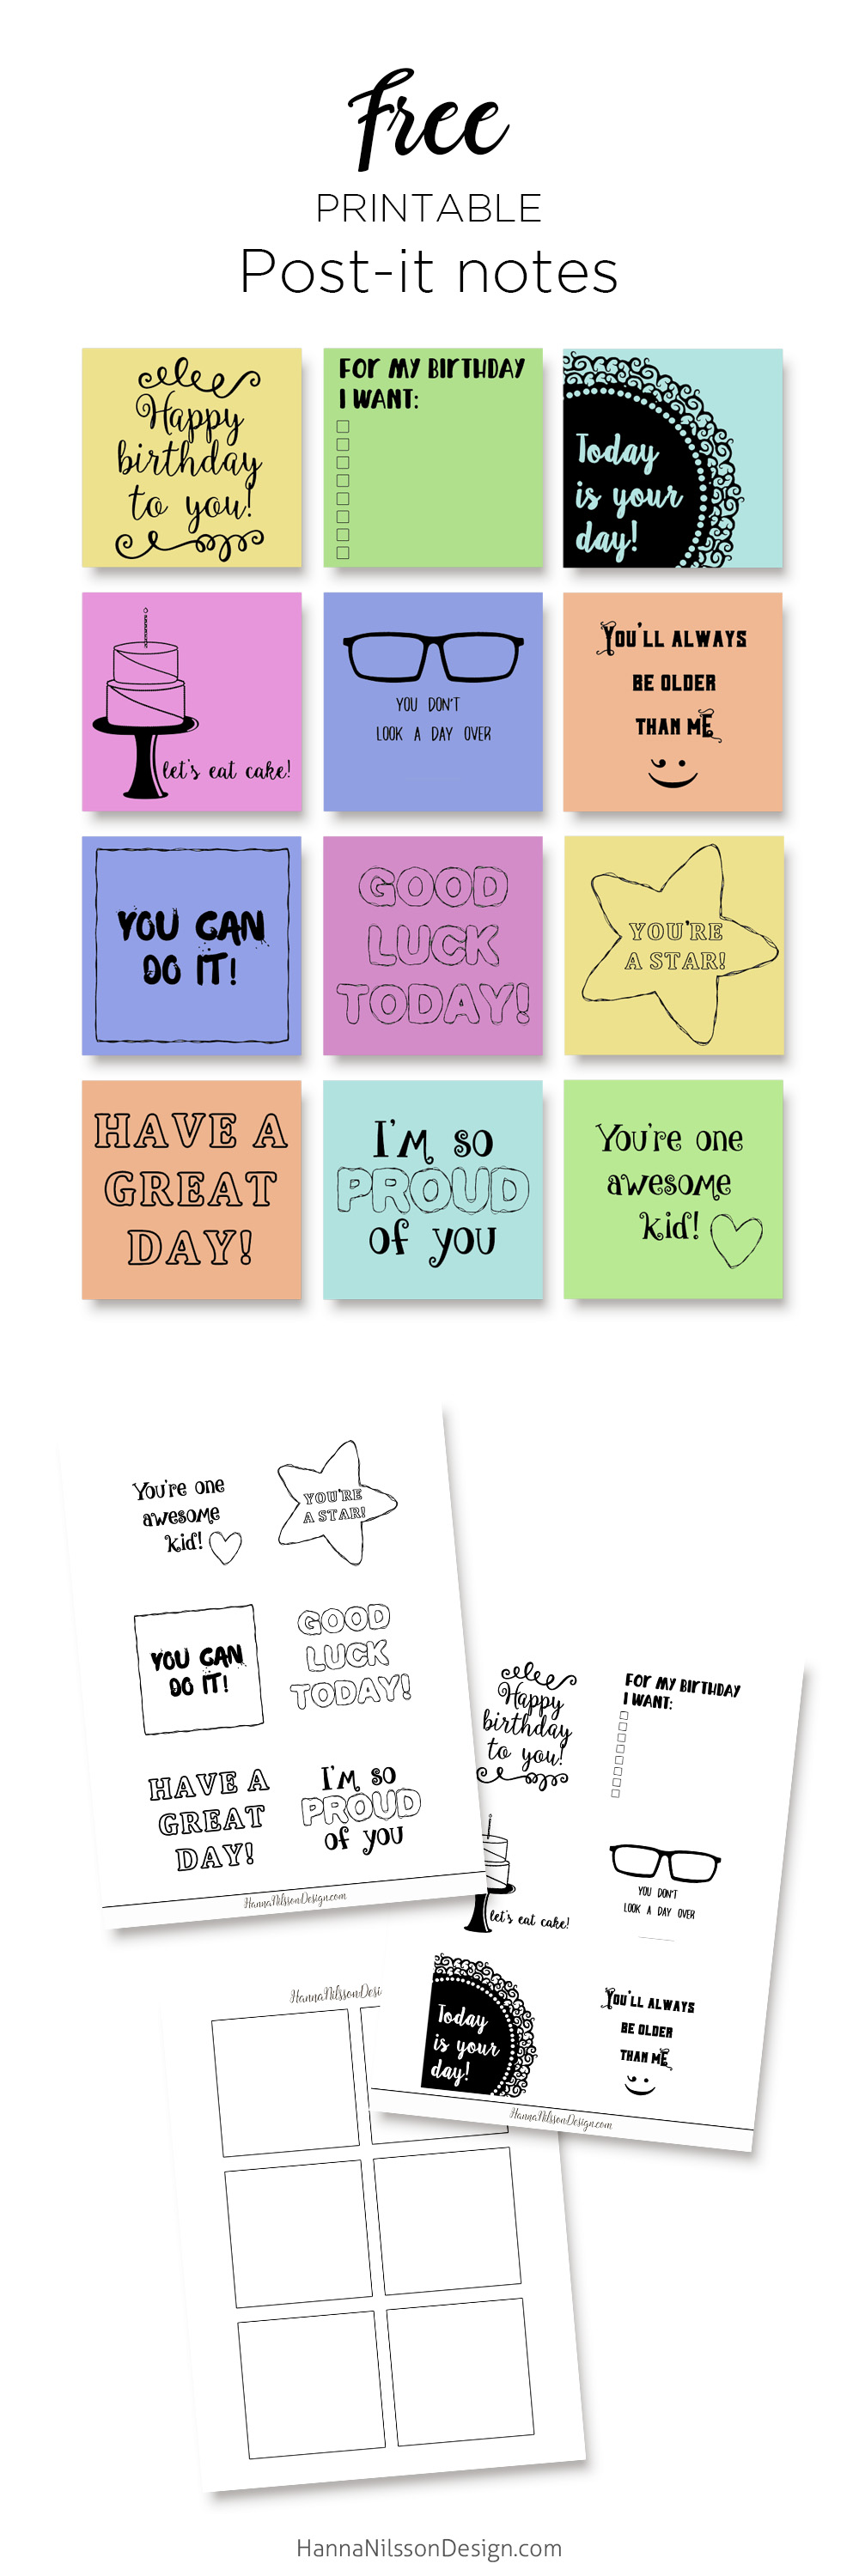 Surprise your kids with printable postit notes in their lunch boxes